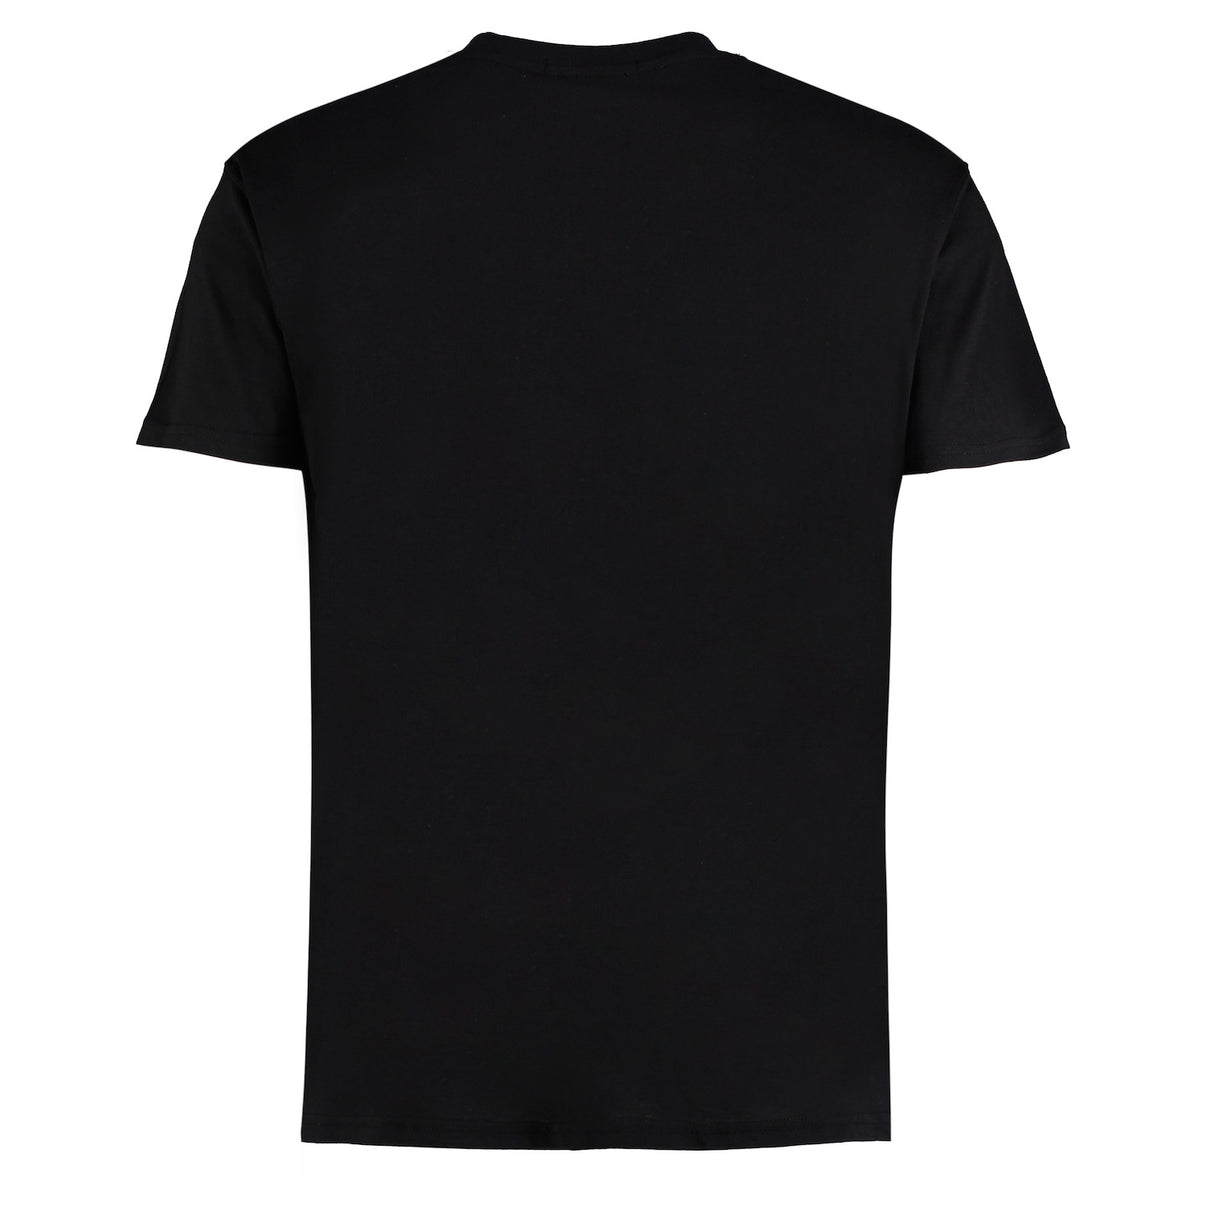 Live Product Options Interactive T-Shirt – cloudlift